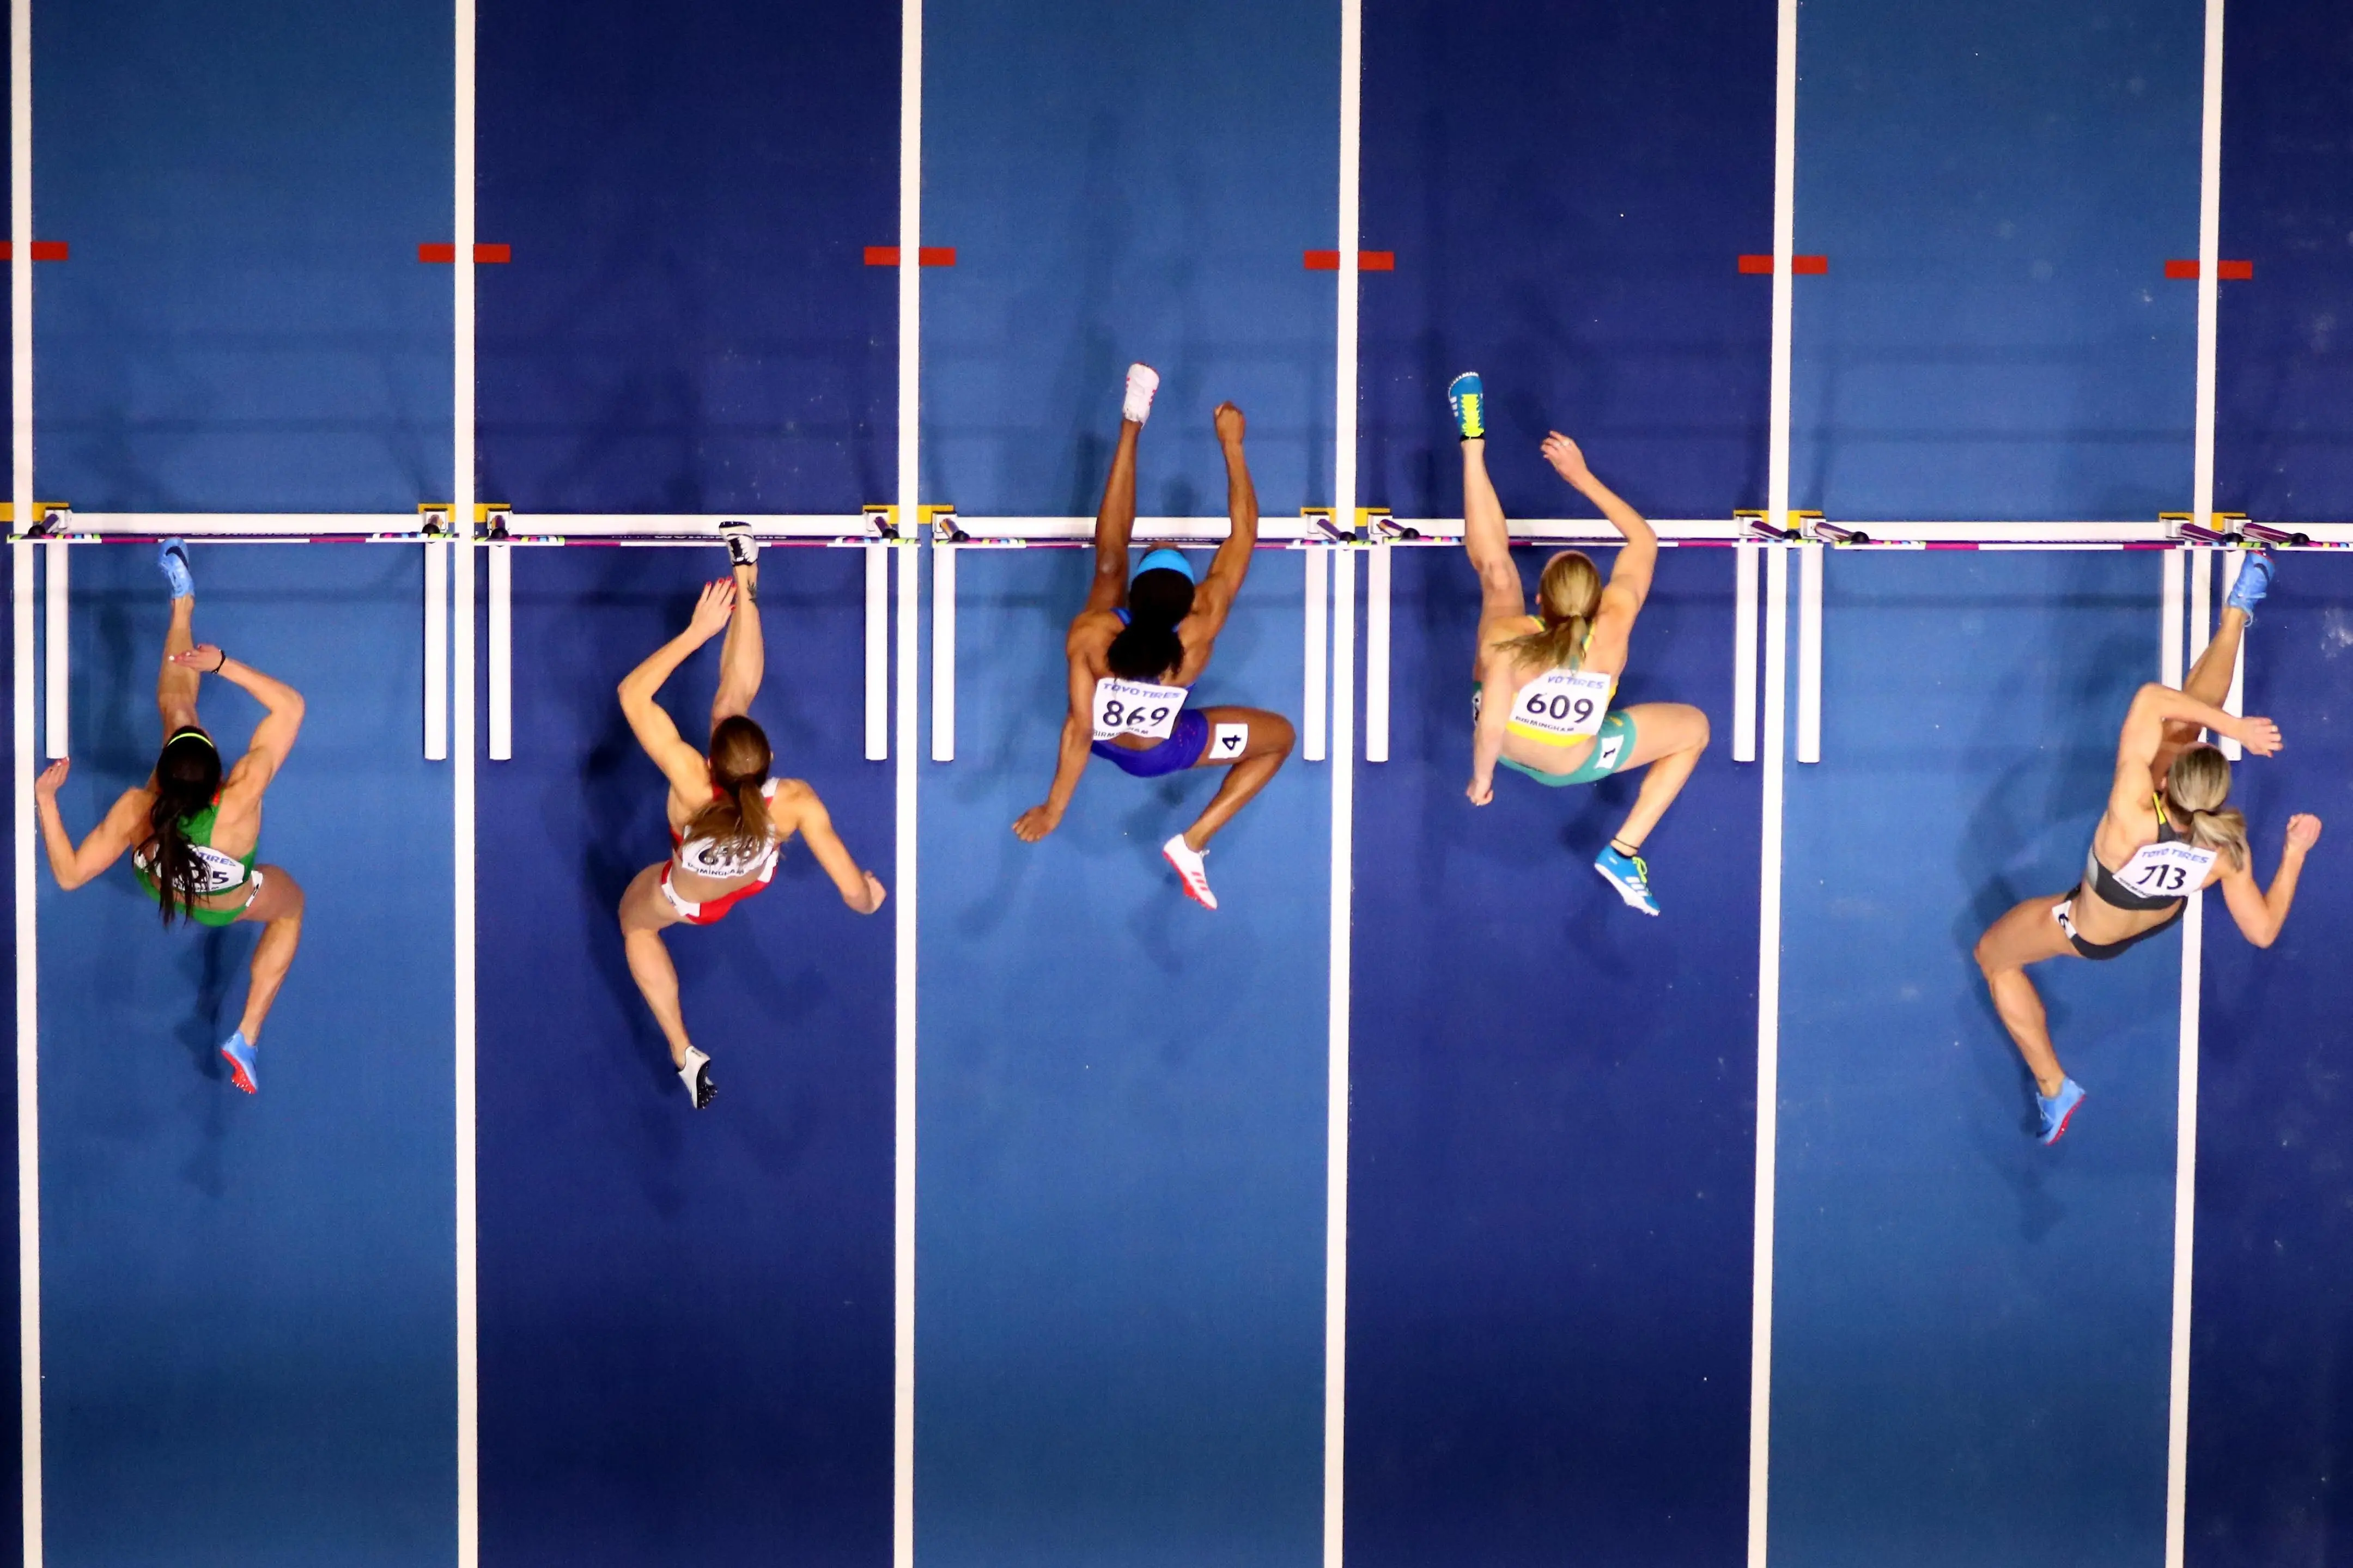 Belgrade22 timetable qualification system scaled